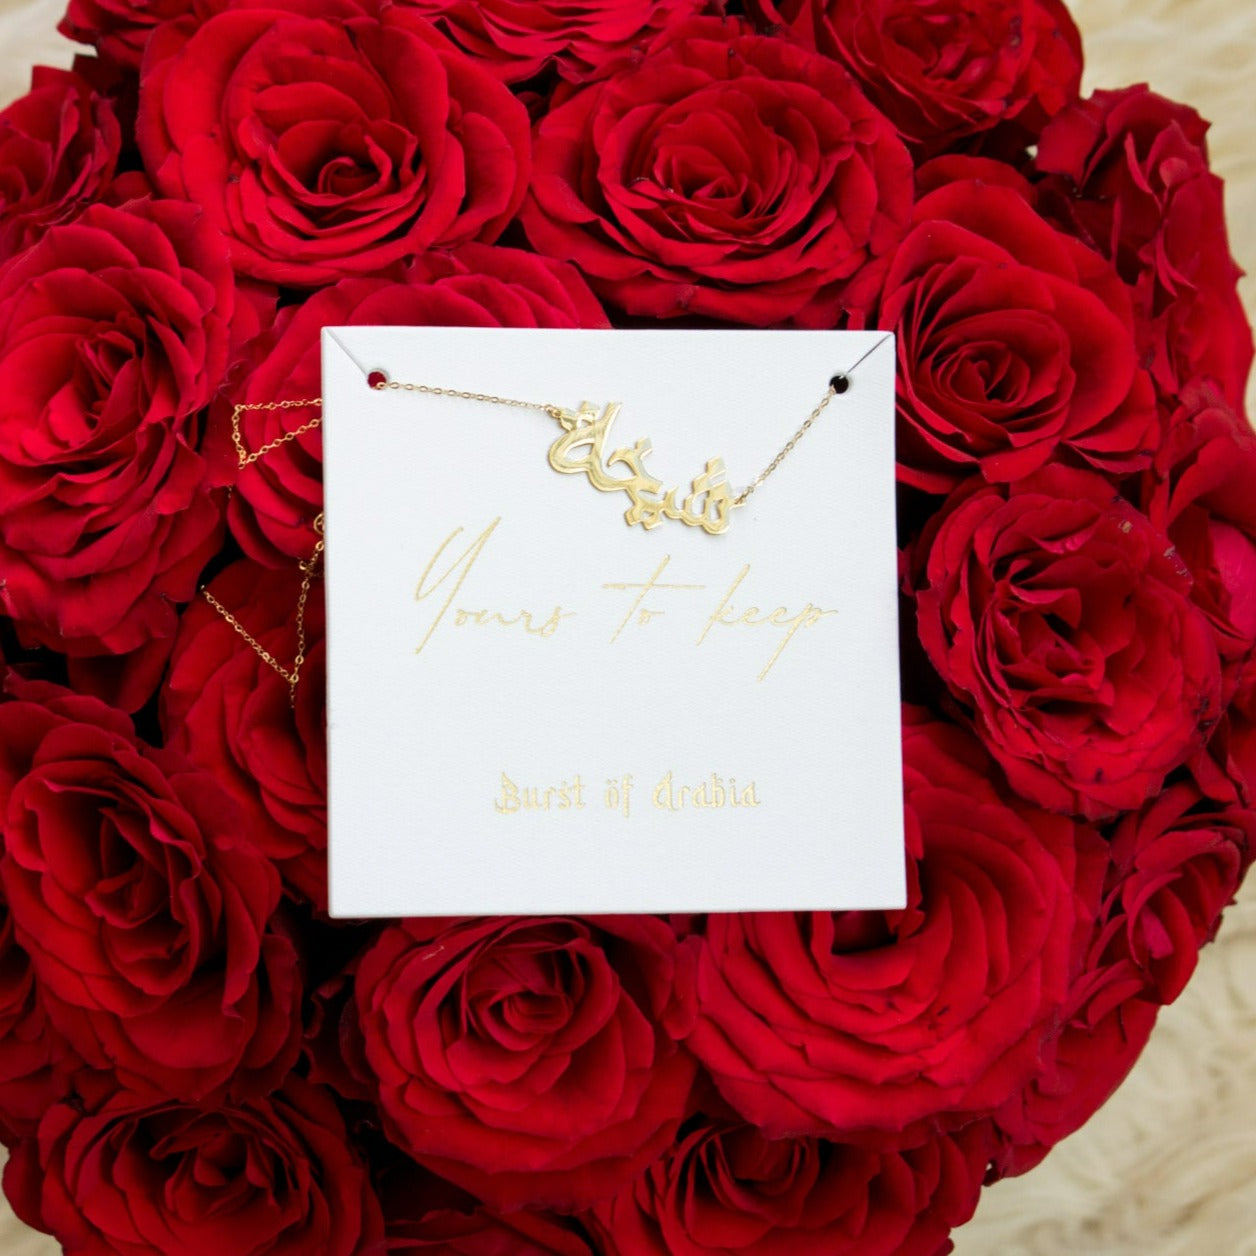 Gold Multiple Name Heart Bracelet - available in gold. Made in real gold, this fine name bracelet is locally handcrafted with the highest quality materials and artisans available in Dubai.  Great addition to your jewelry collection and is also the ideal wedding or anniversary gift for a loved one.